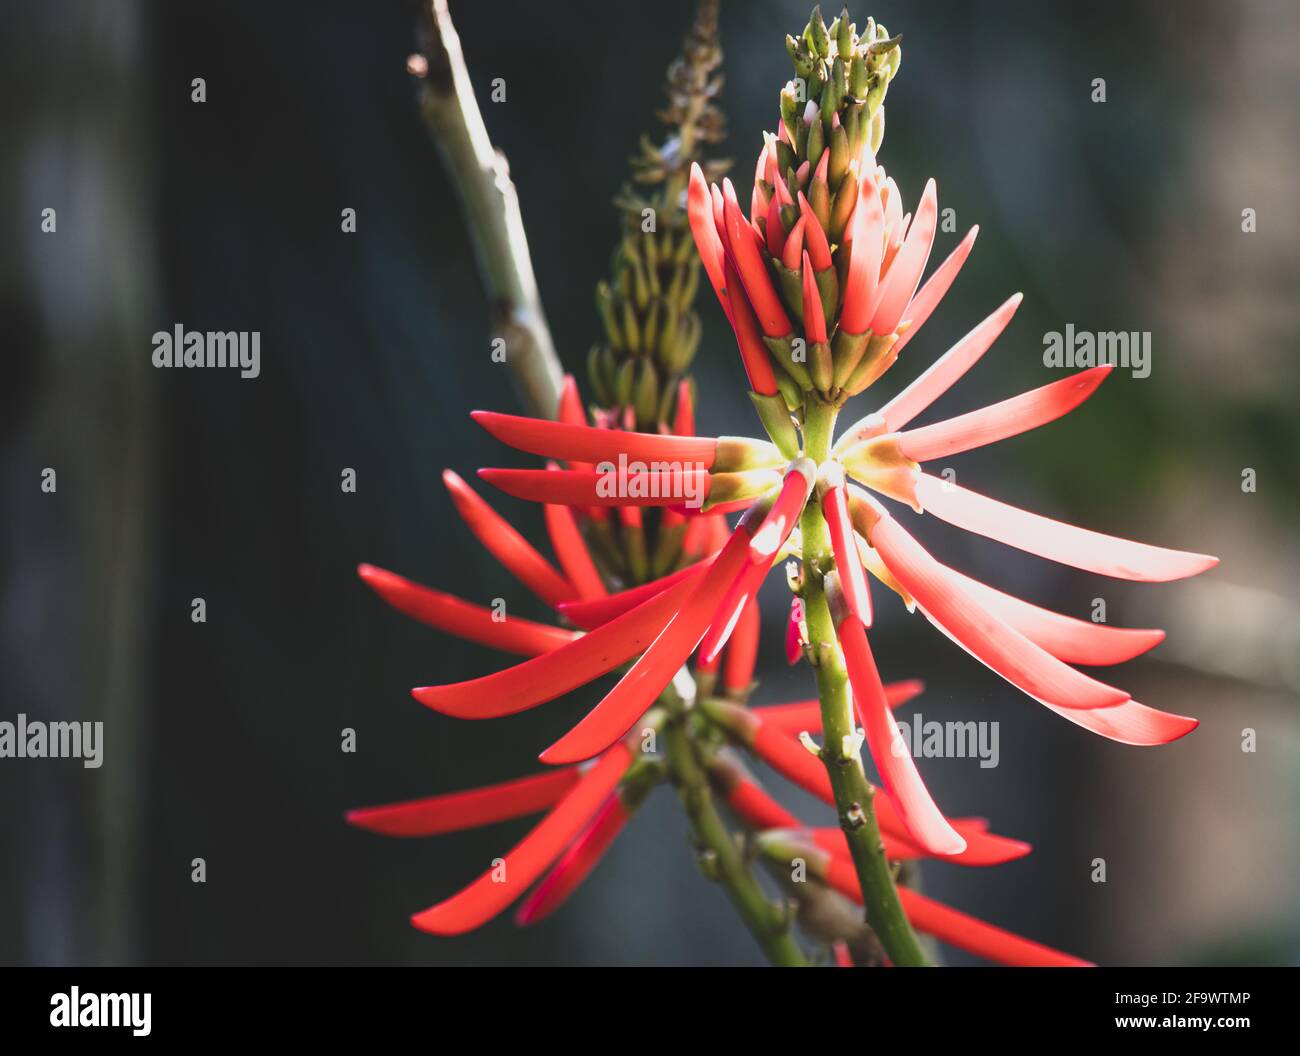 Selective focus of exotic Erythrina atitlanensis flowers on blurred background Stock Photo